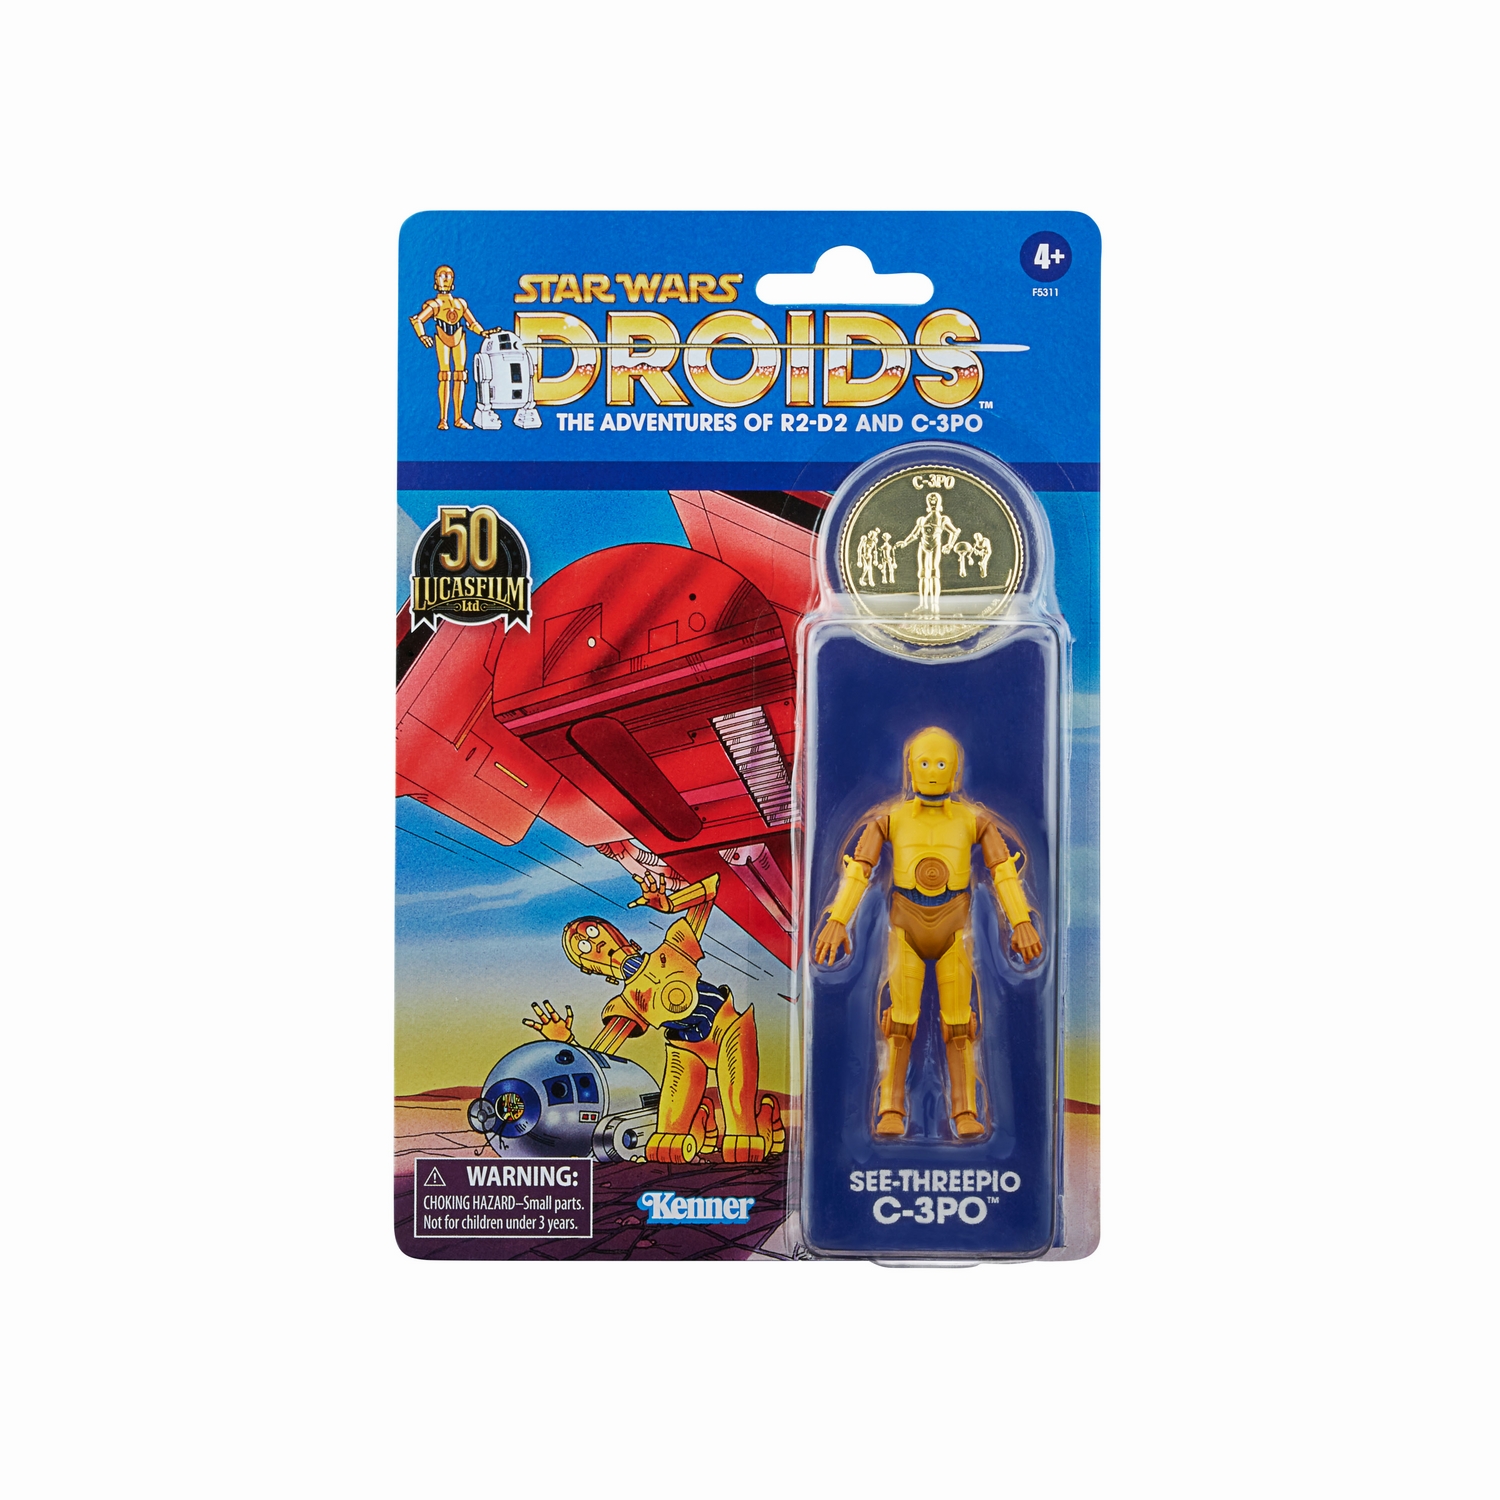 STAR WARS THE VINTAGE COLLECTION 3.75-INCH SEE-THREEPIO (C-3PO) Figure_in pck 2.jpg